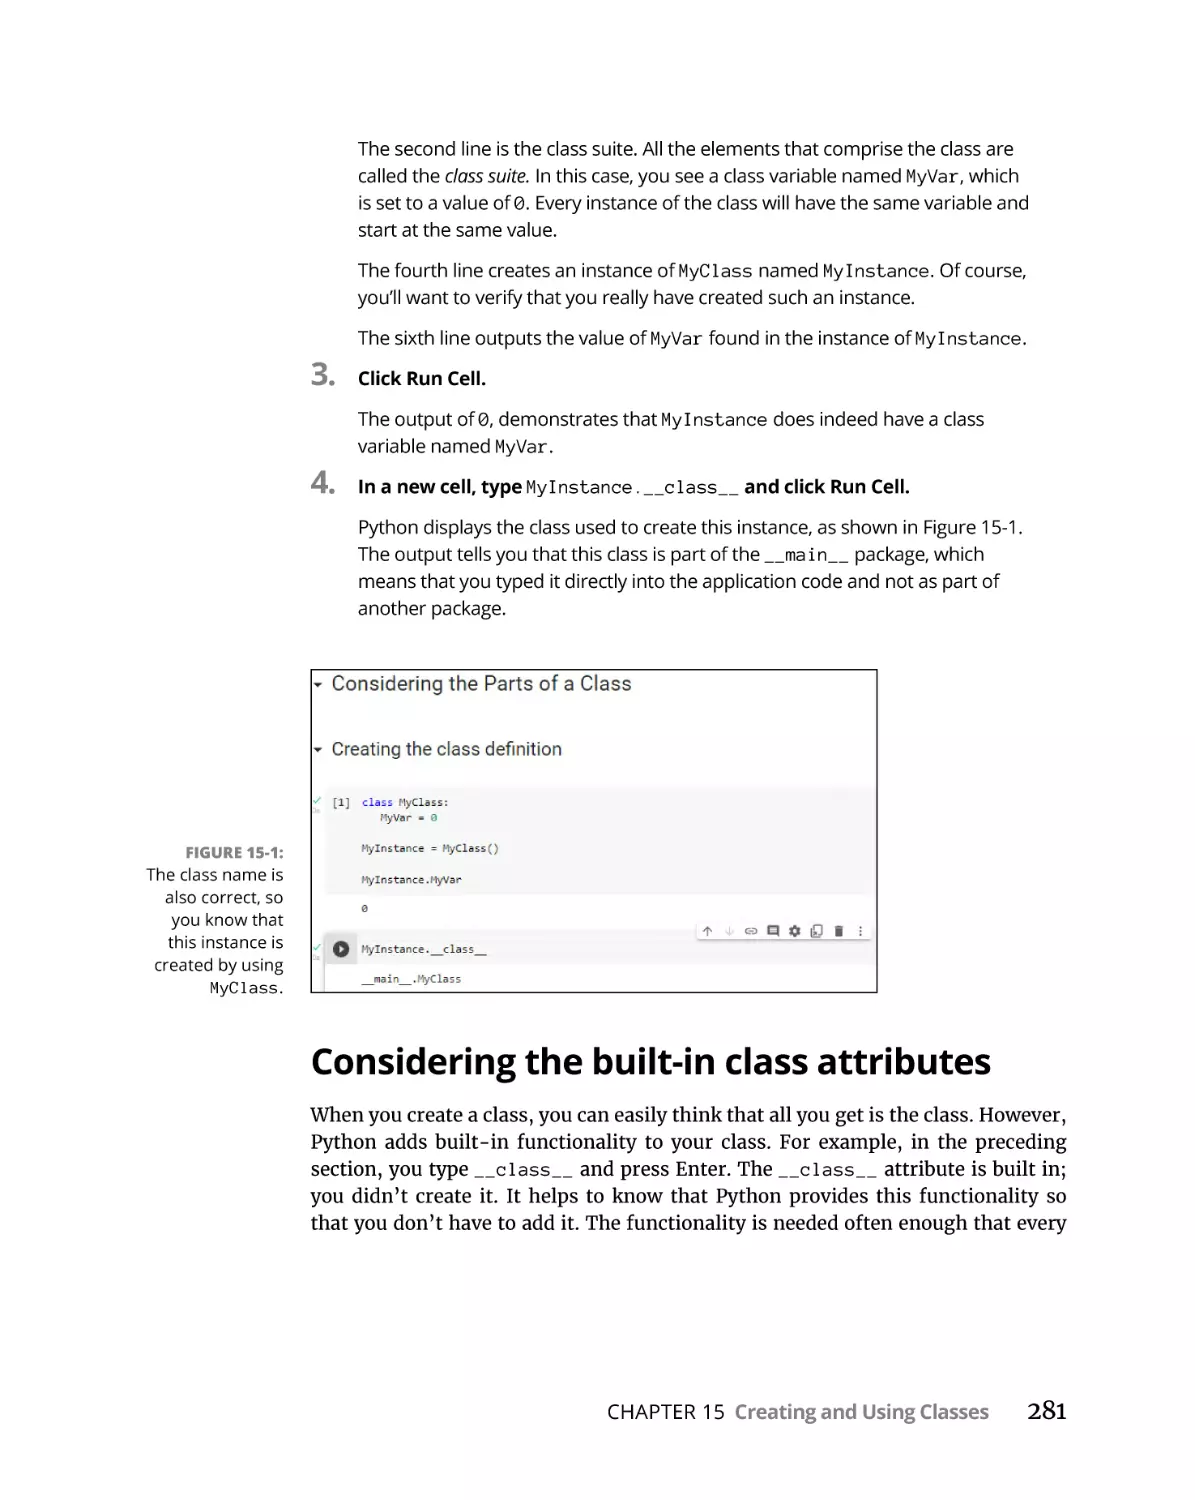 Considering the built-in class attributes